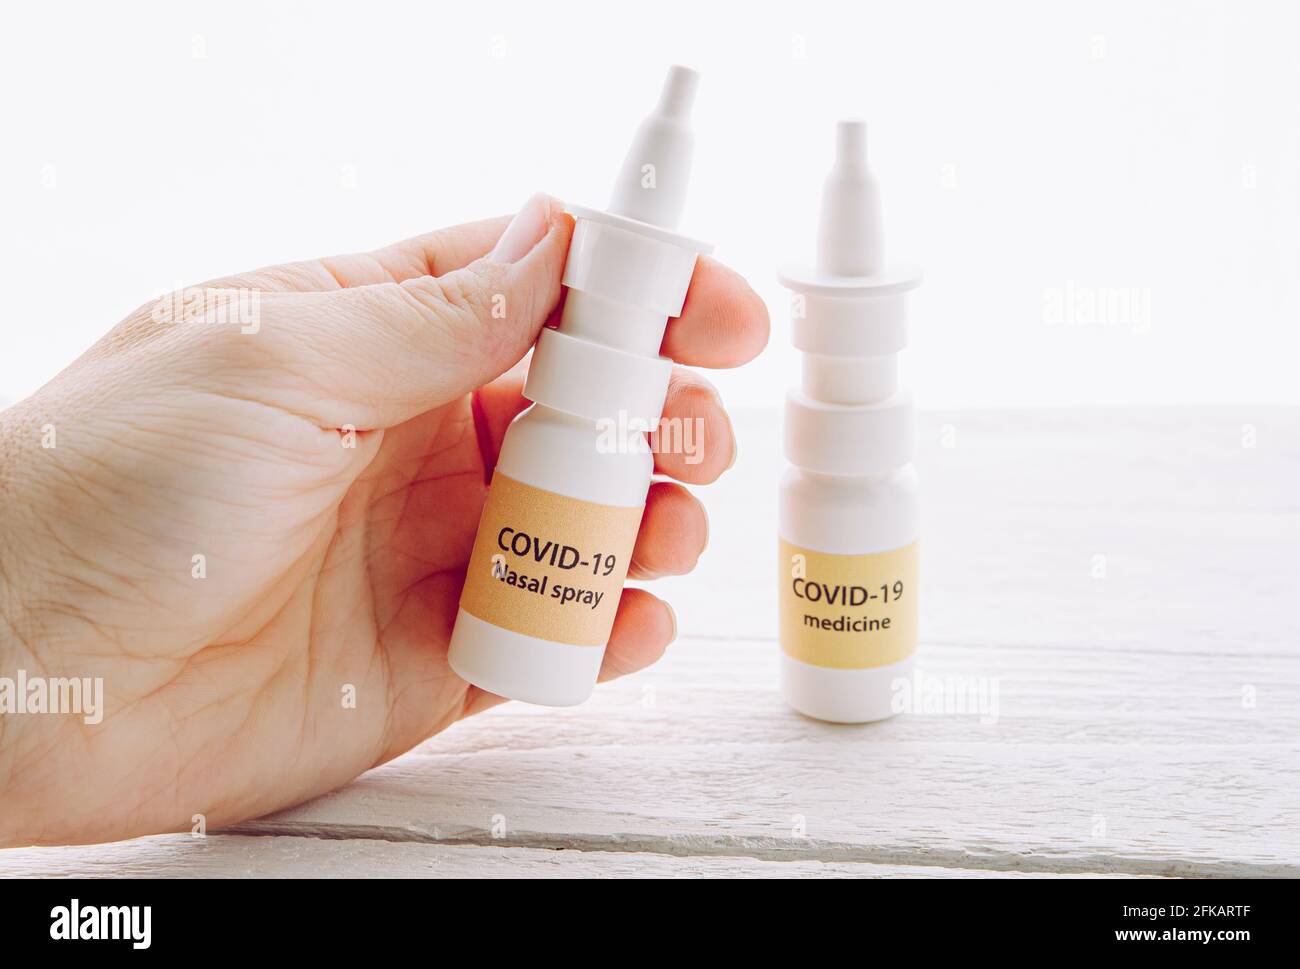 Person holding new treatment against Coronavirus COVID-19 nasal spray. Conceptual image of person hand holding new innovative nasal spray bottle. Stock Photo